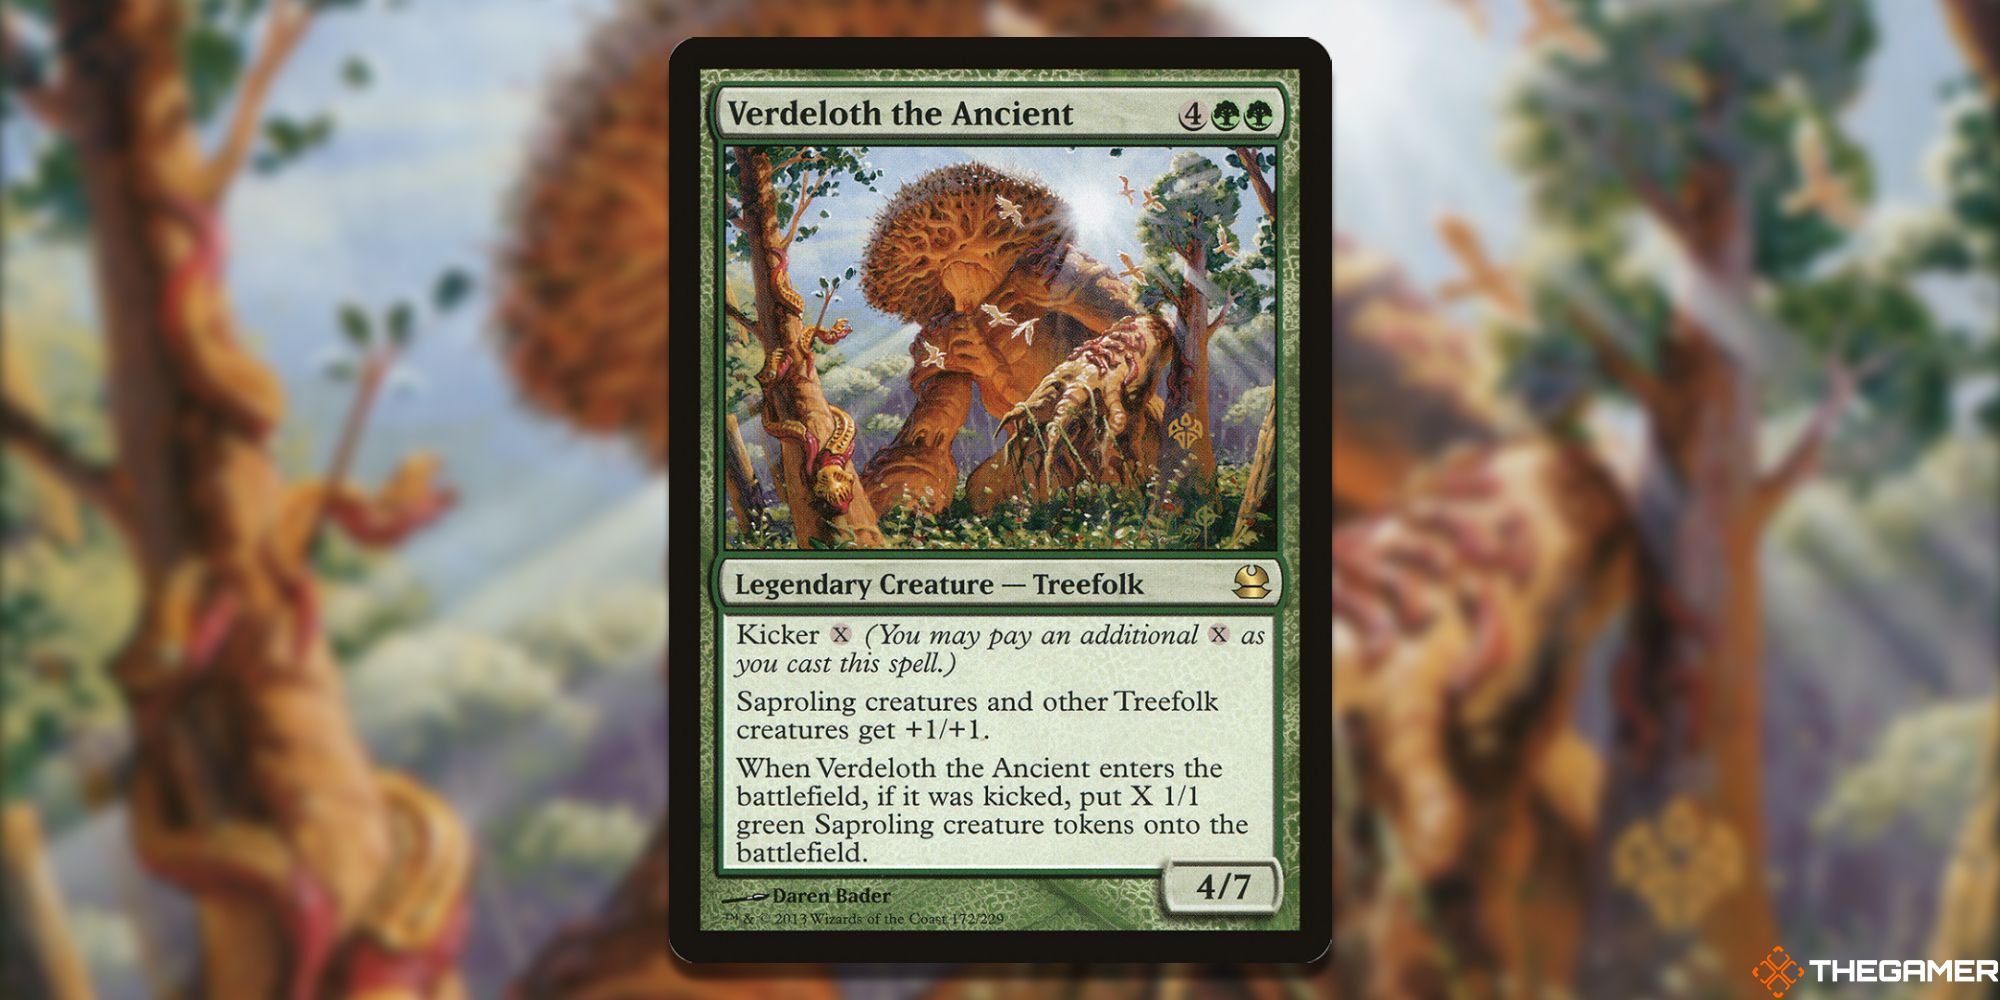 The card Verdeloth the Ancient from Magic: The Gathering.